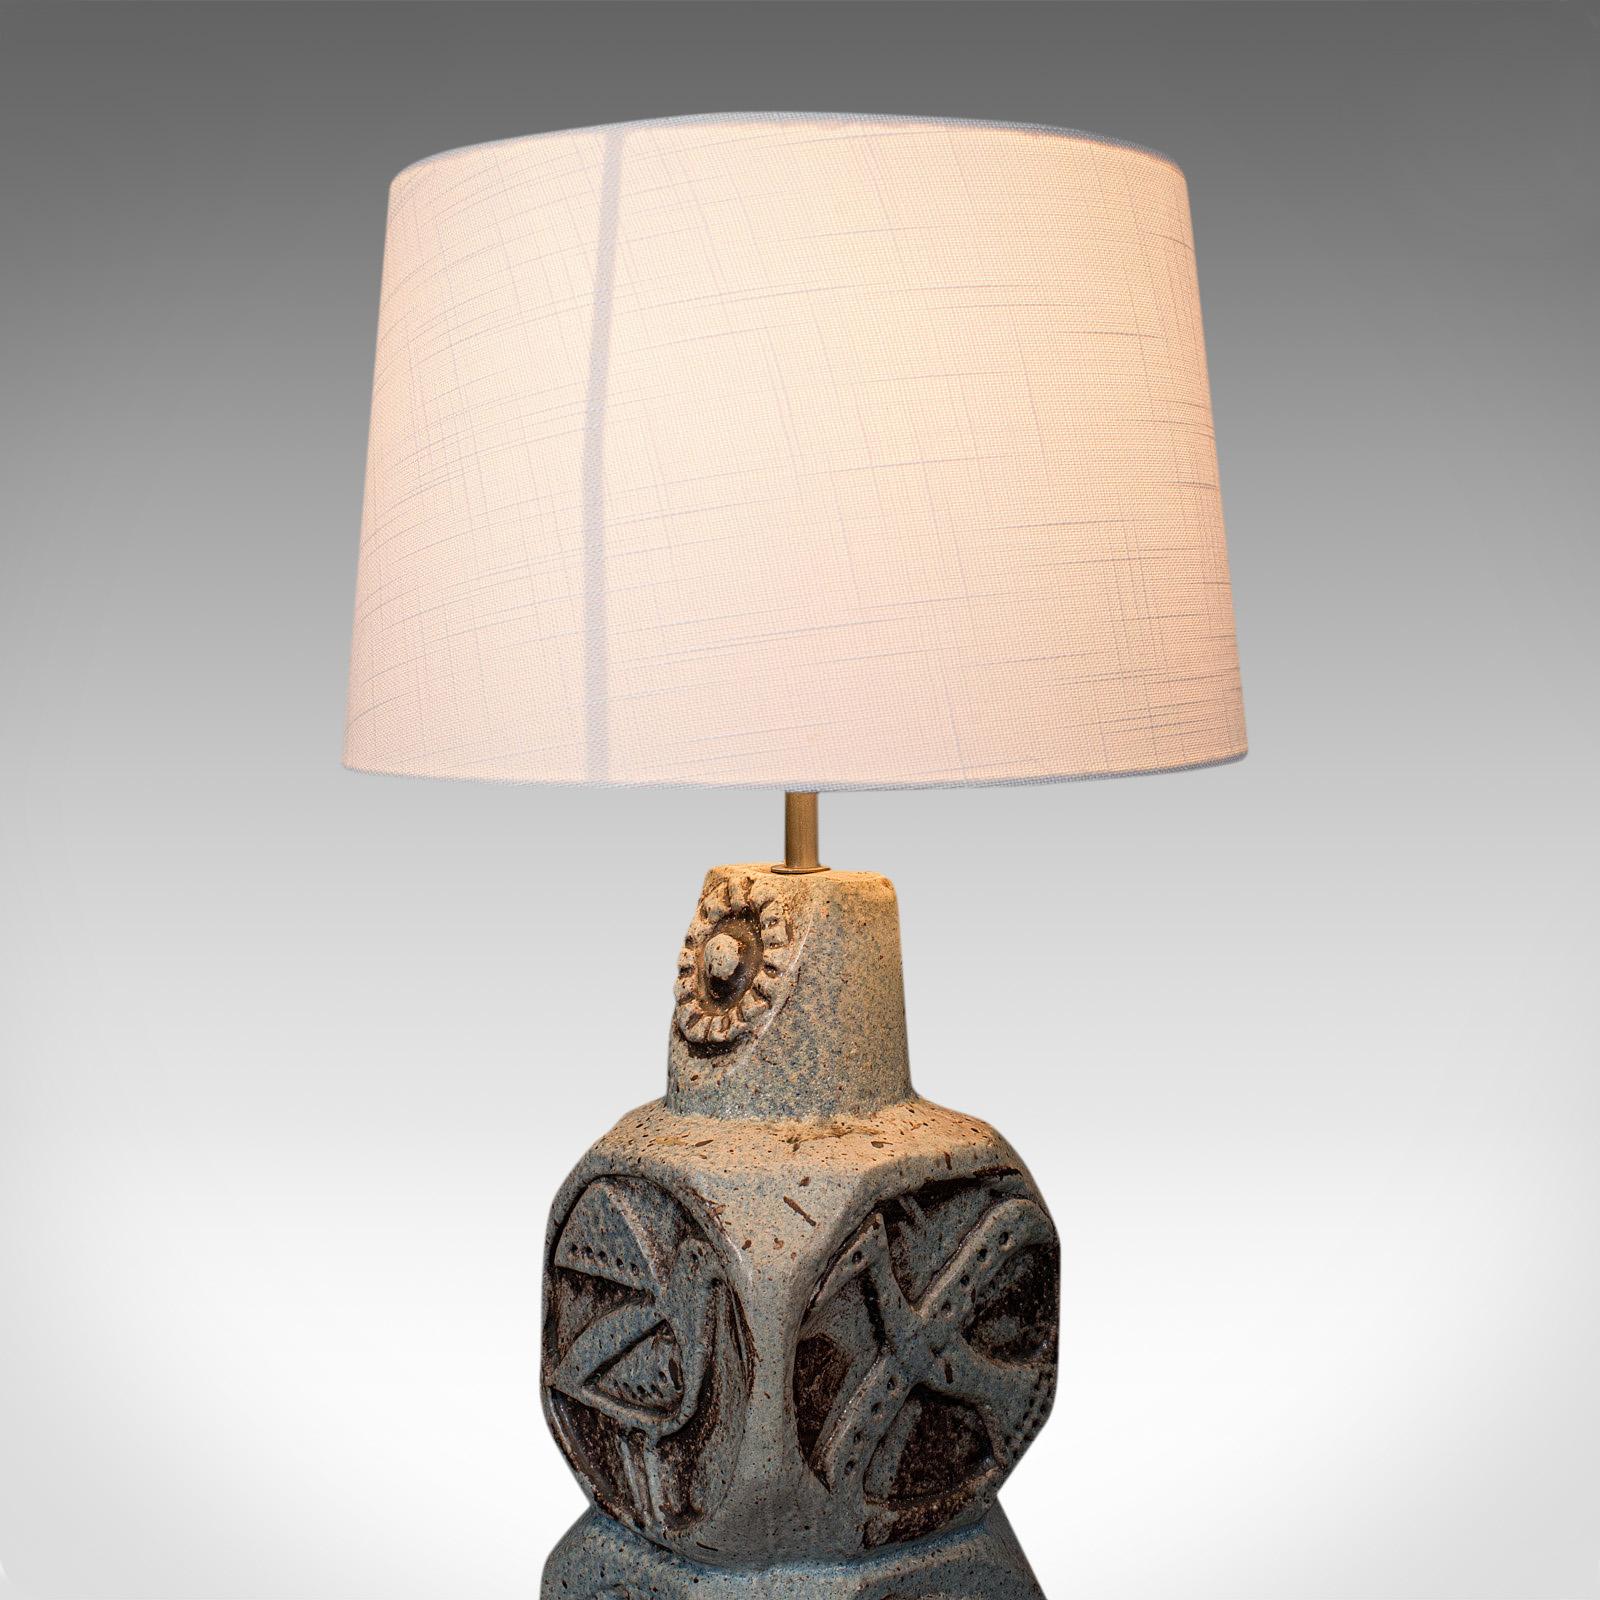 Vintage Table Lamp, English, Ceramic, Side Light, After Troika, 20th Century For Sale 1